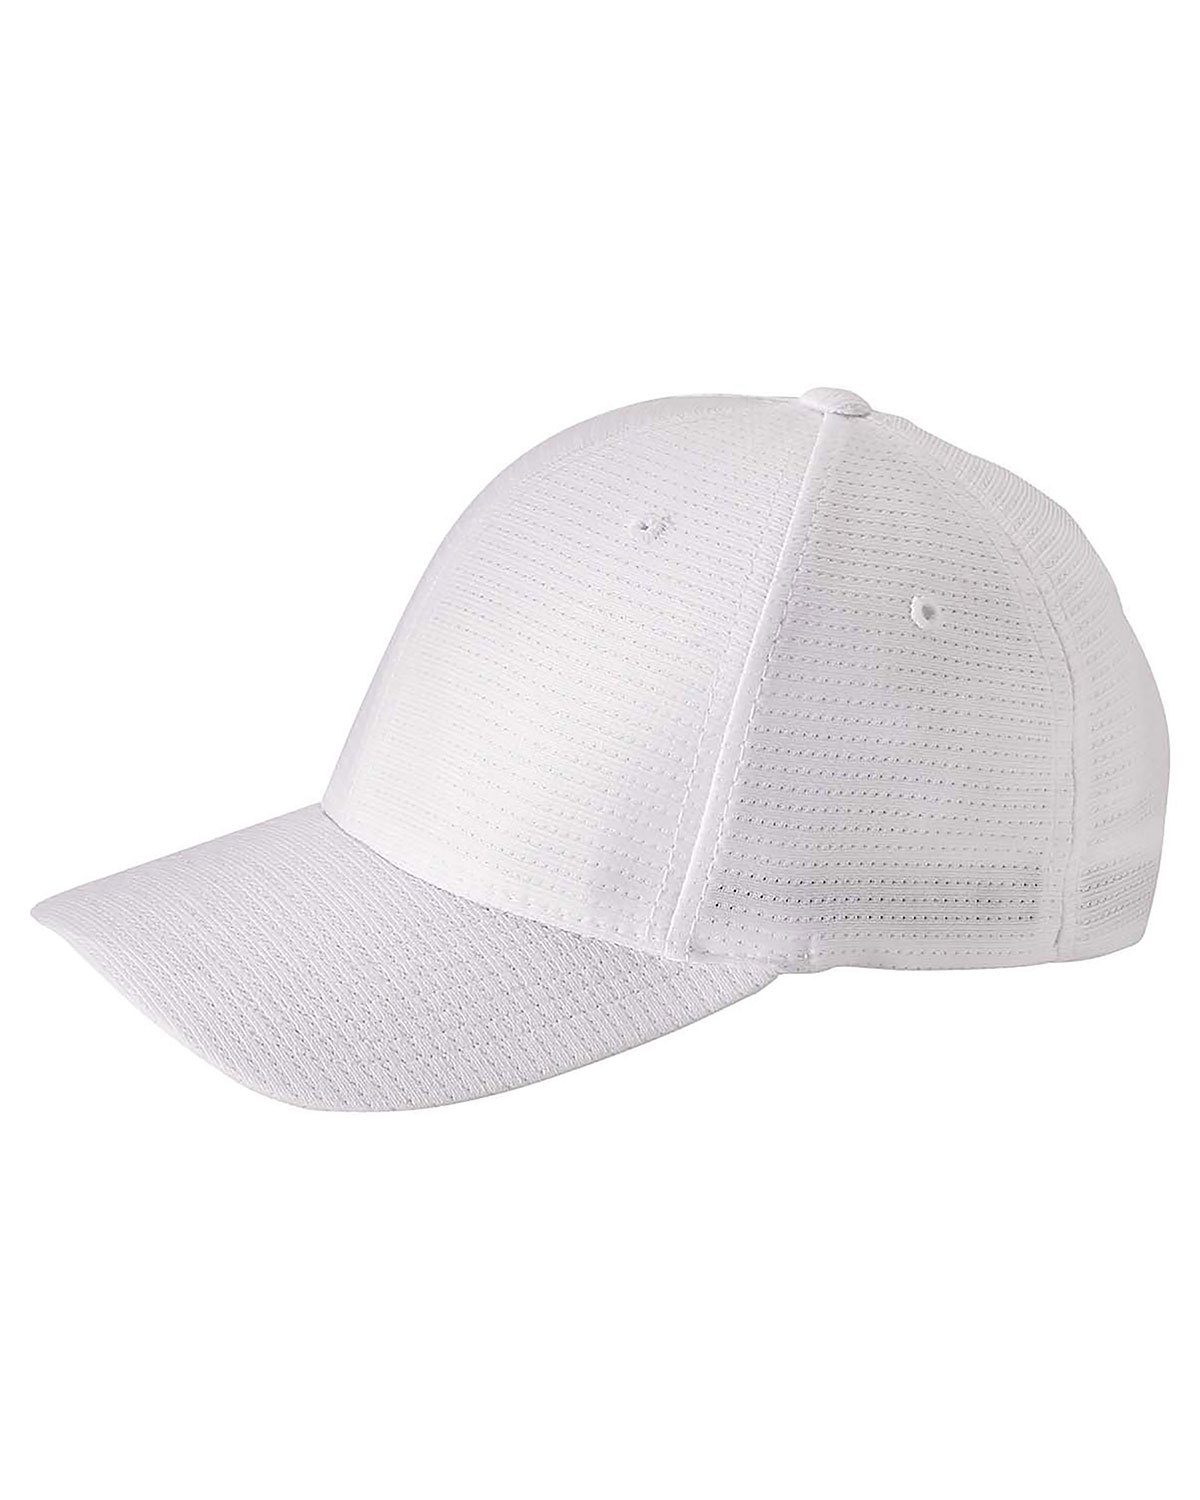 Yupoong 6572 Unisex Cool & Dry Tricot Cap at Apparelstation